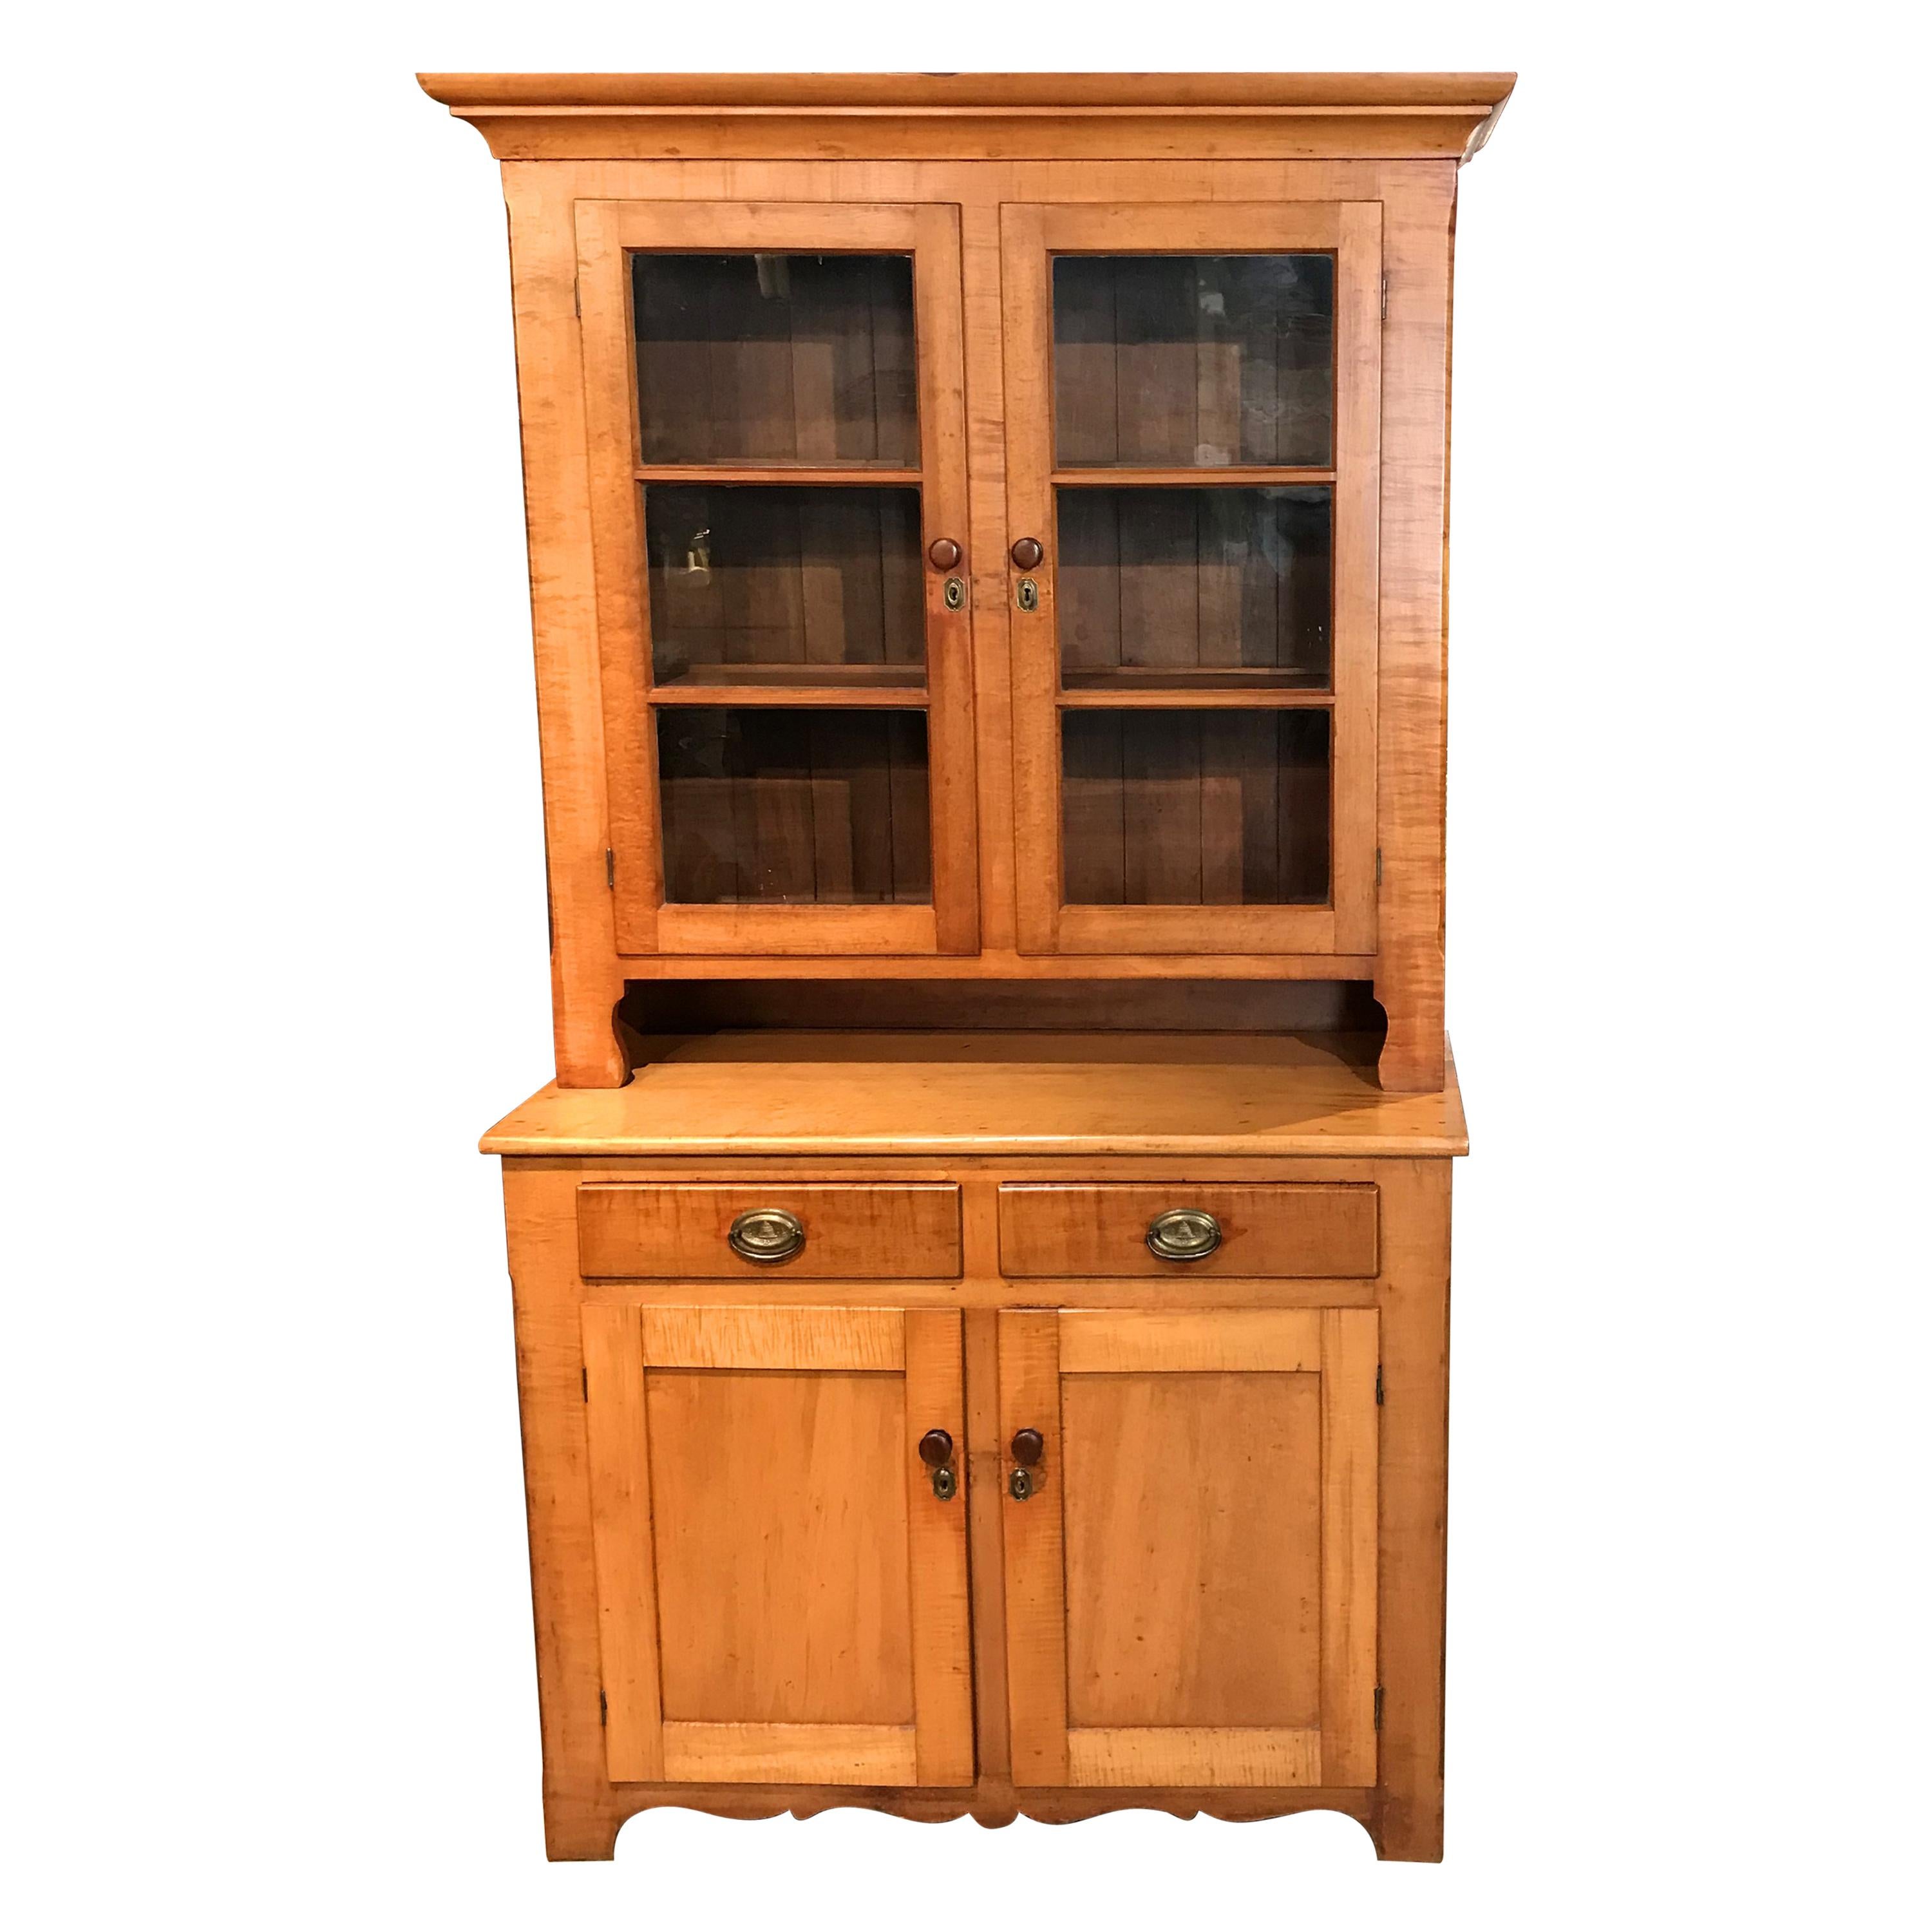 19th Century New England Two Part Tiger Maple Cupboard or Hutch